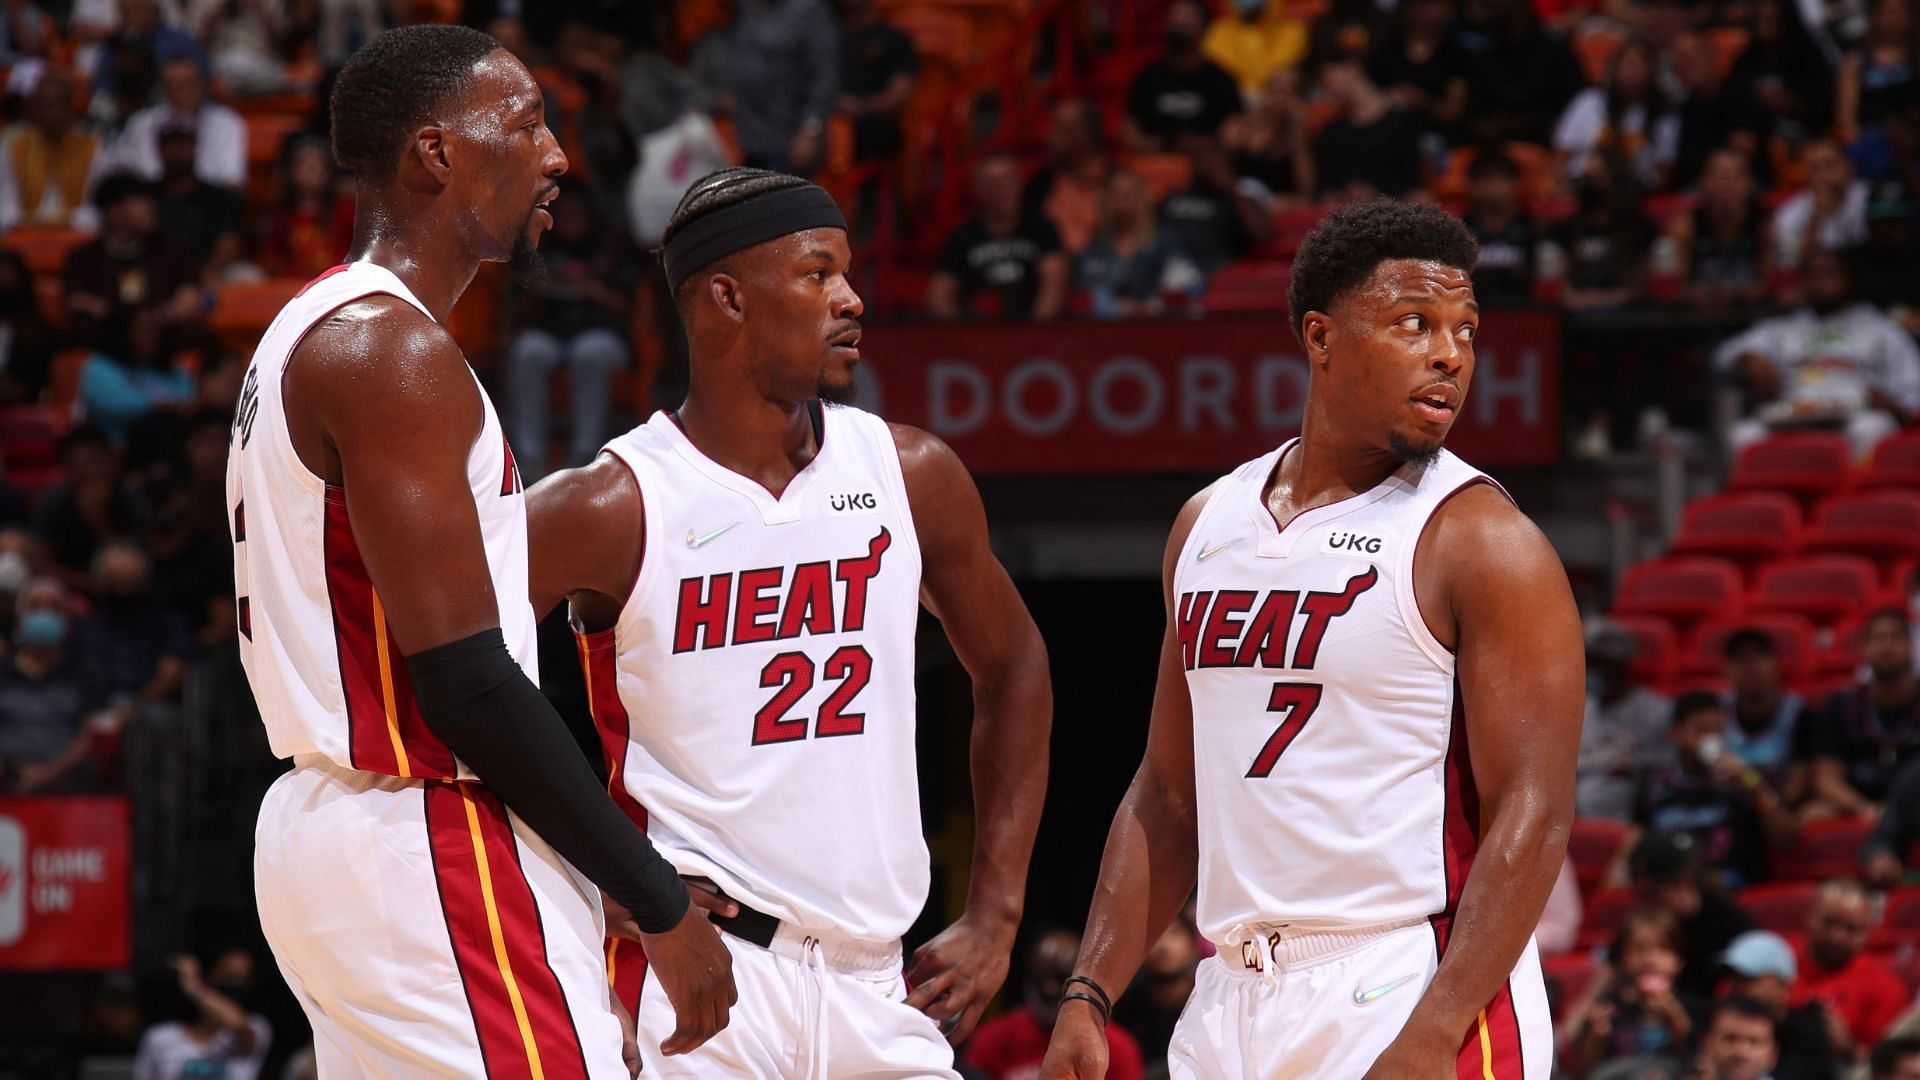 The Miami Heat Big 3 is still incomplete with Kyle Lowry still missing games for personal reasons. [Photo: Sporting News]